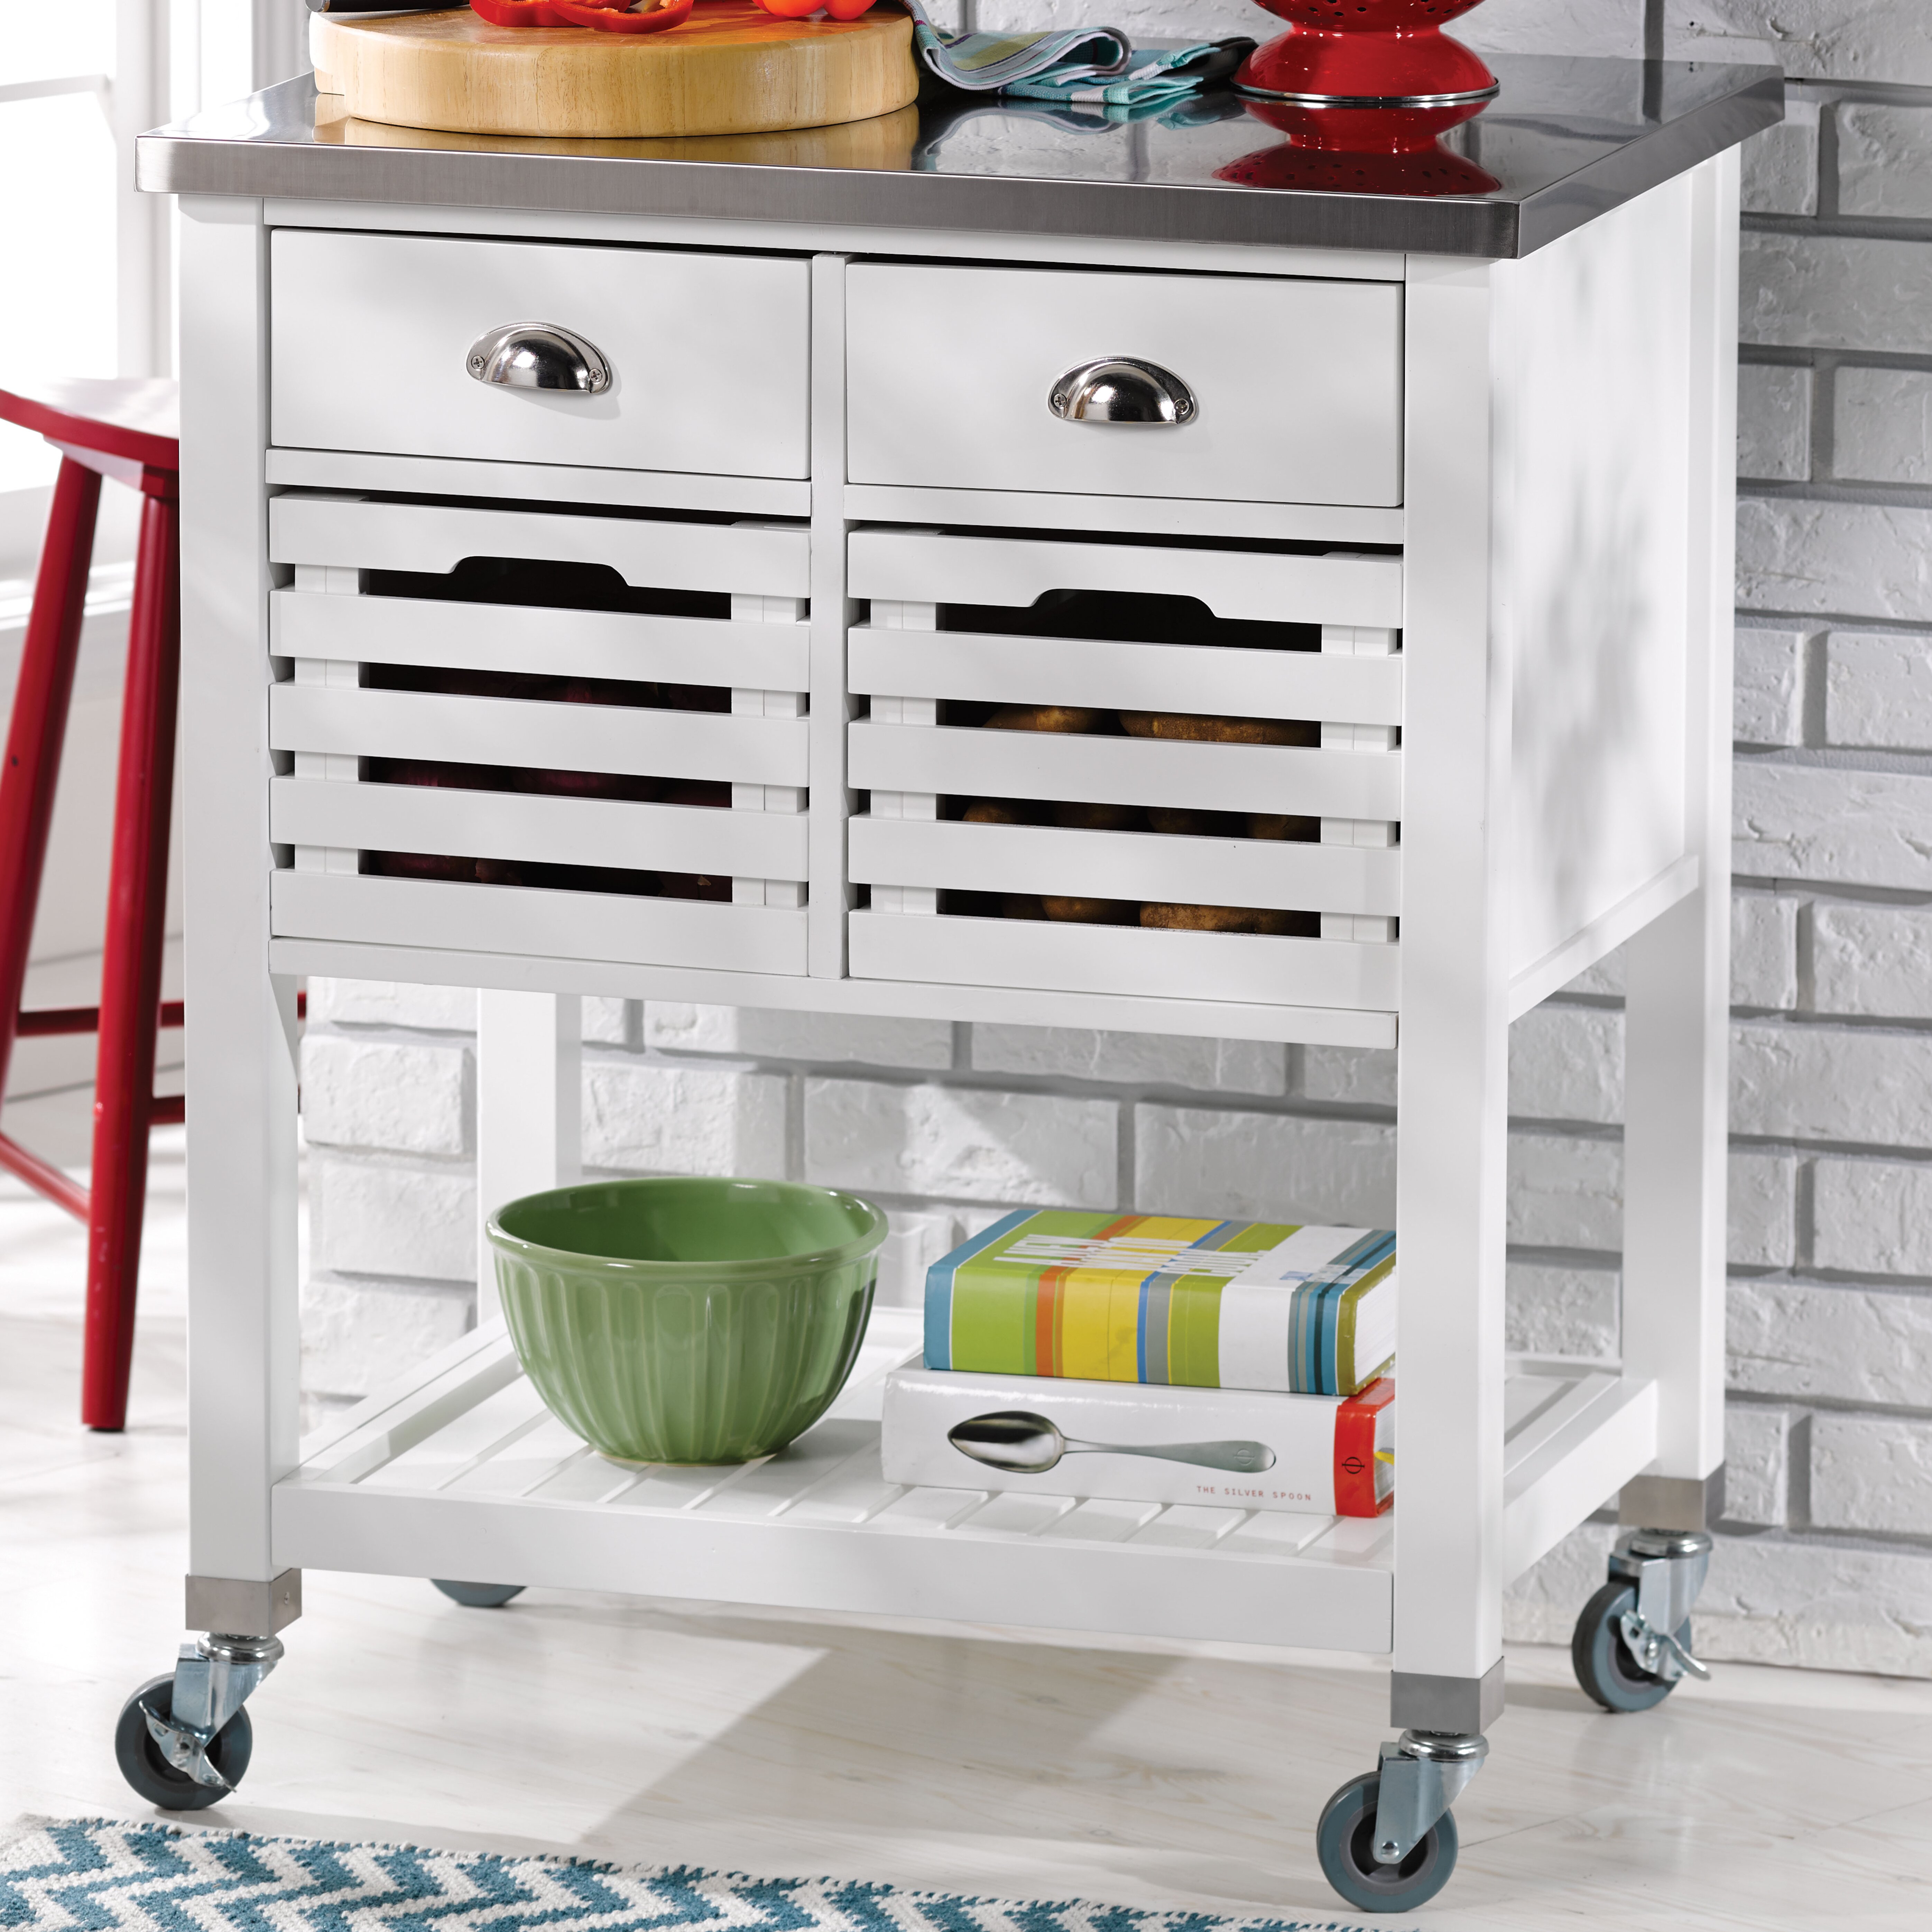 Andover Mills Kitchen Cart with Stainless Steel Top & Reviews | Wayfair Kitchen Cart With Stainless Steel Top